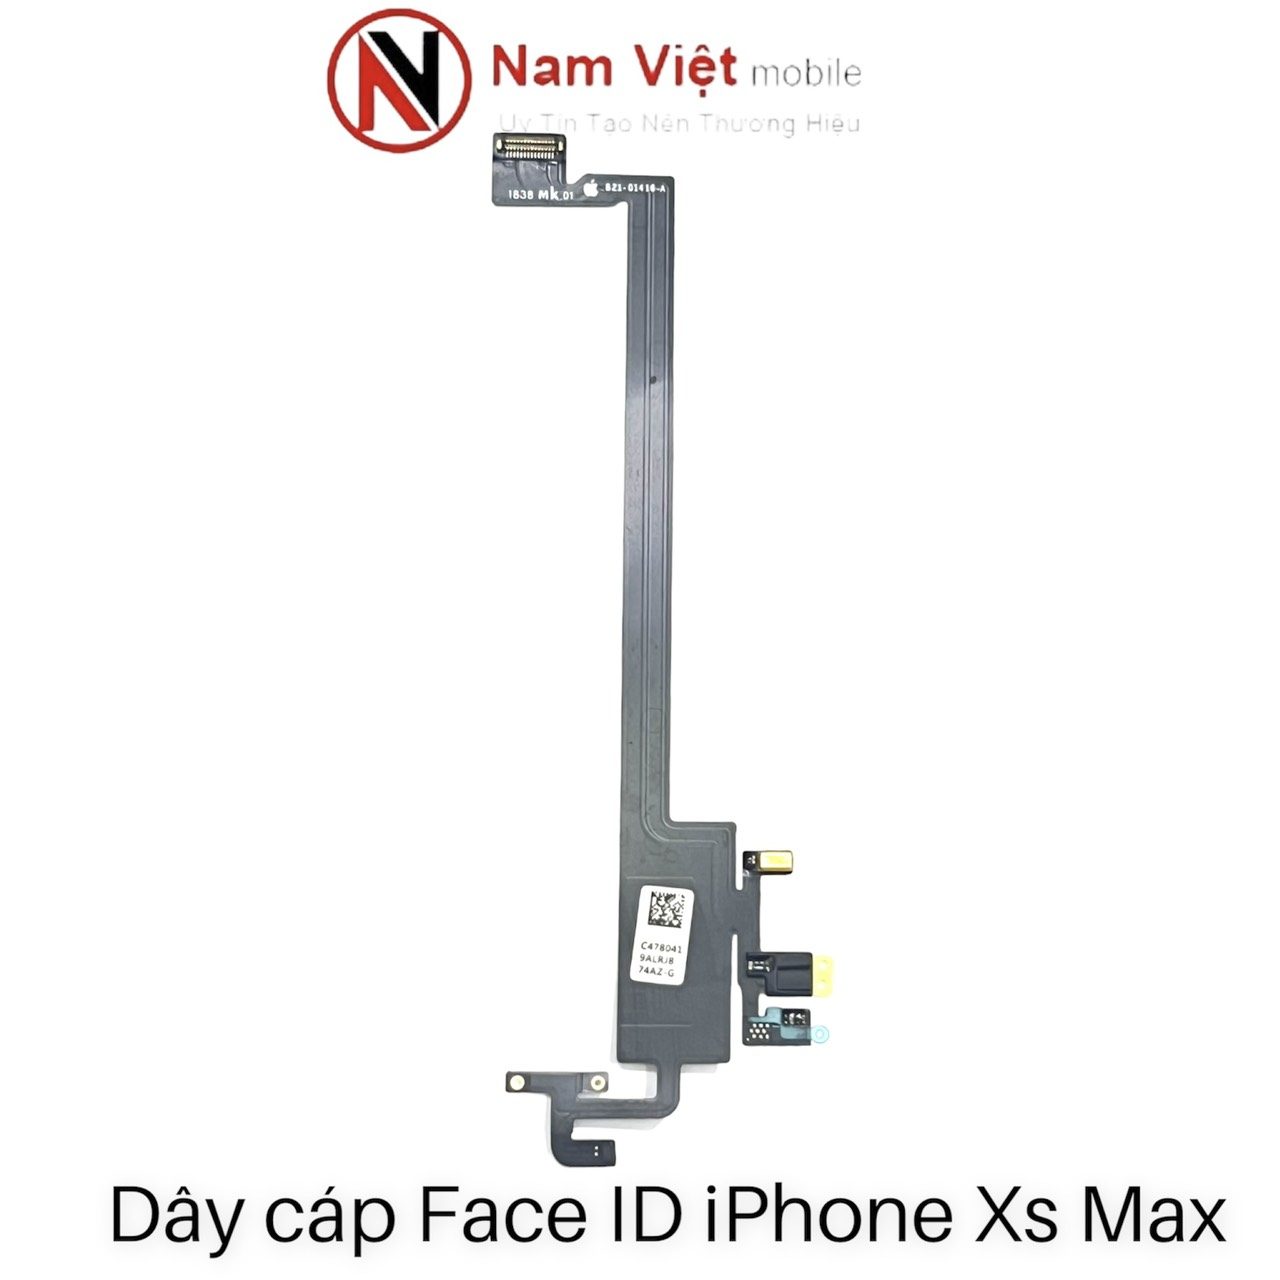 Dây cáp Face ID iPhone Xs Max